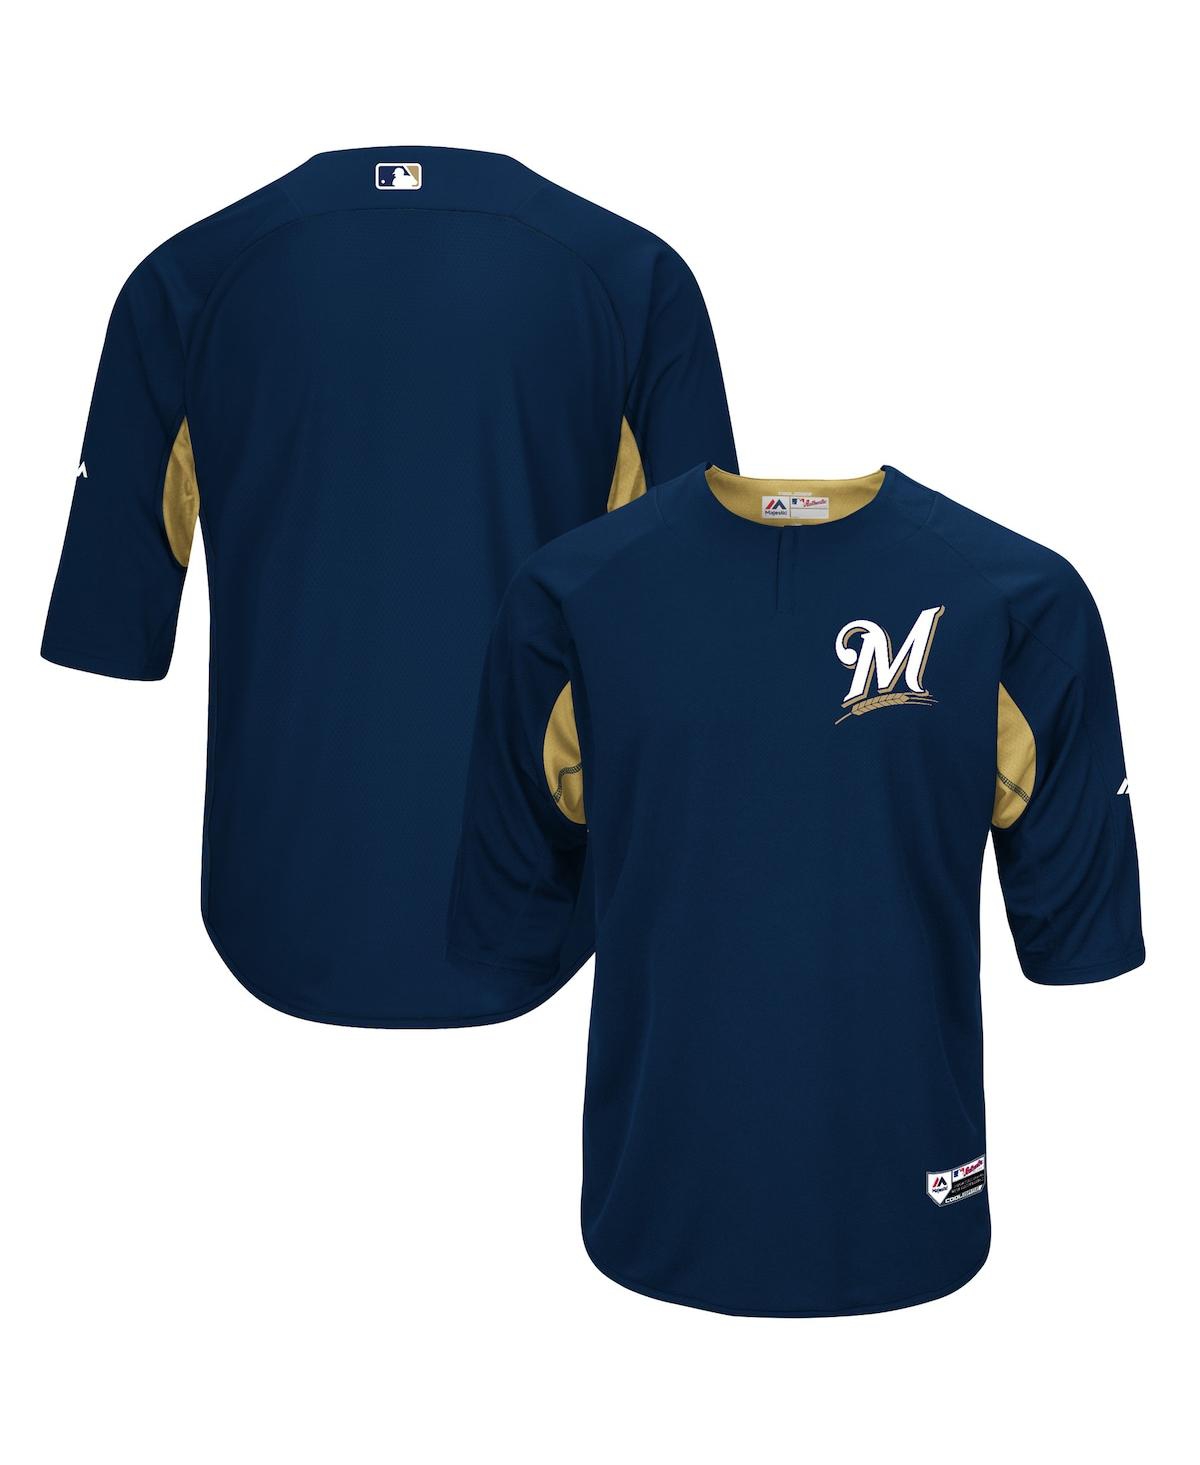 Men's Majestic Navy, Gold Milwaukee Brewers Authentic Collection On-Field 3/4-Sleeve Batting Practice Jersey - Navy, Gold